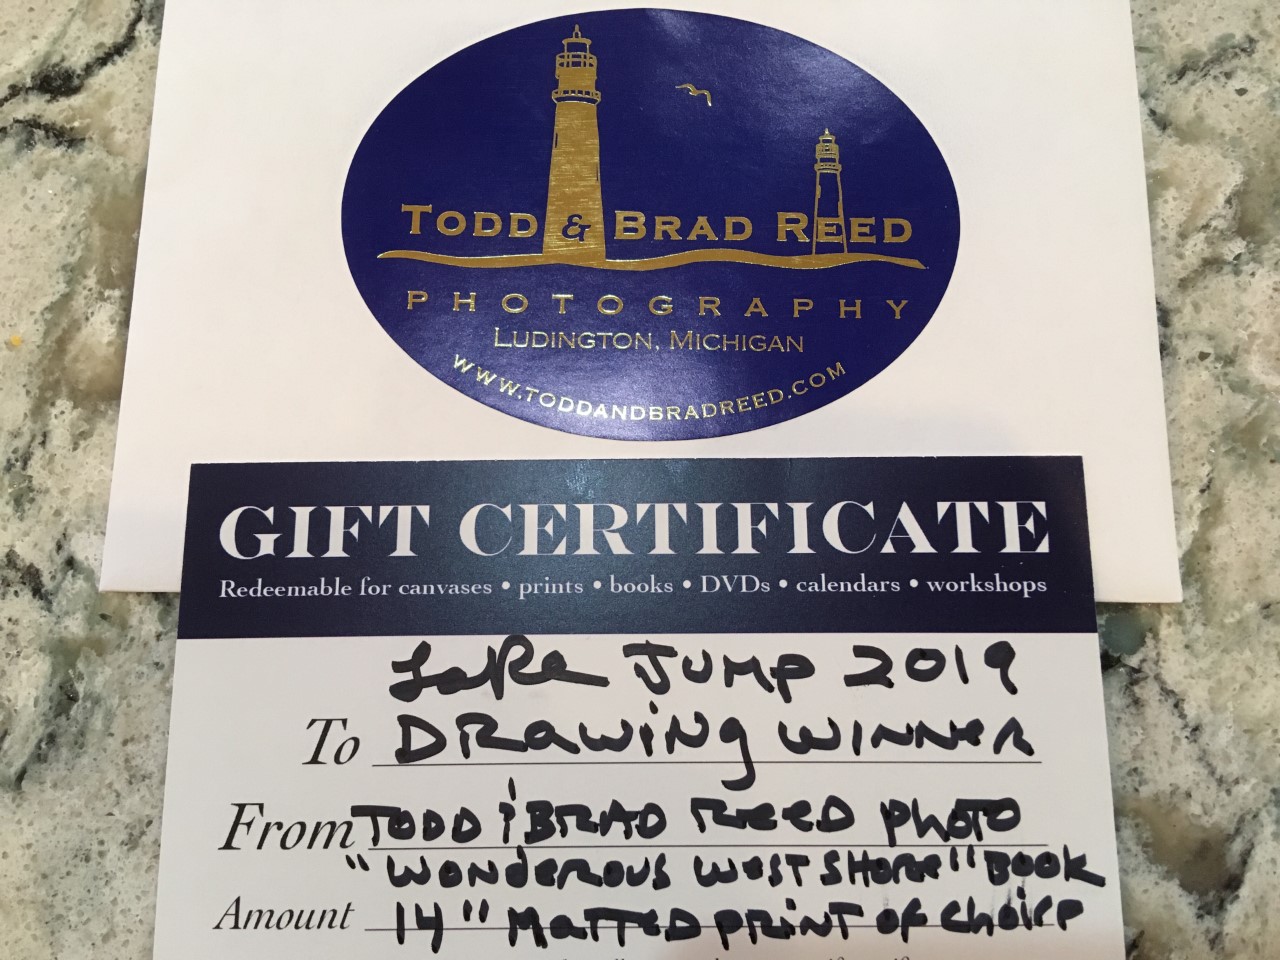 One lucky jumper will also get a prize from Todd and Brad Reed Photography